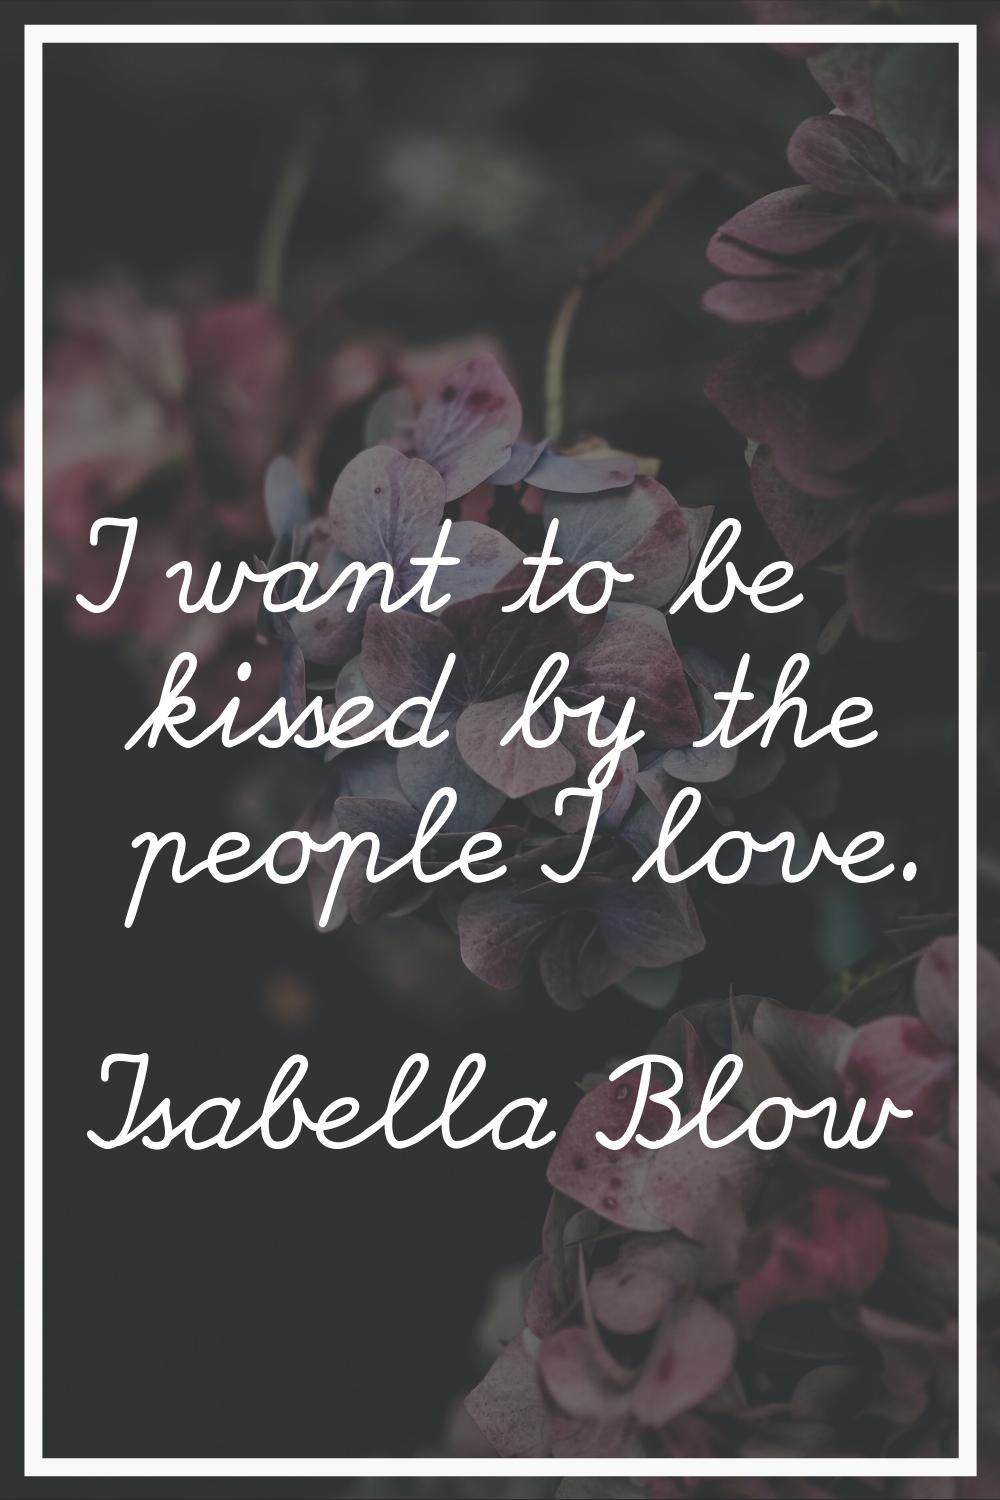 I want to be kissed by the people I love.